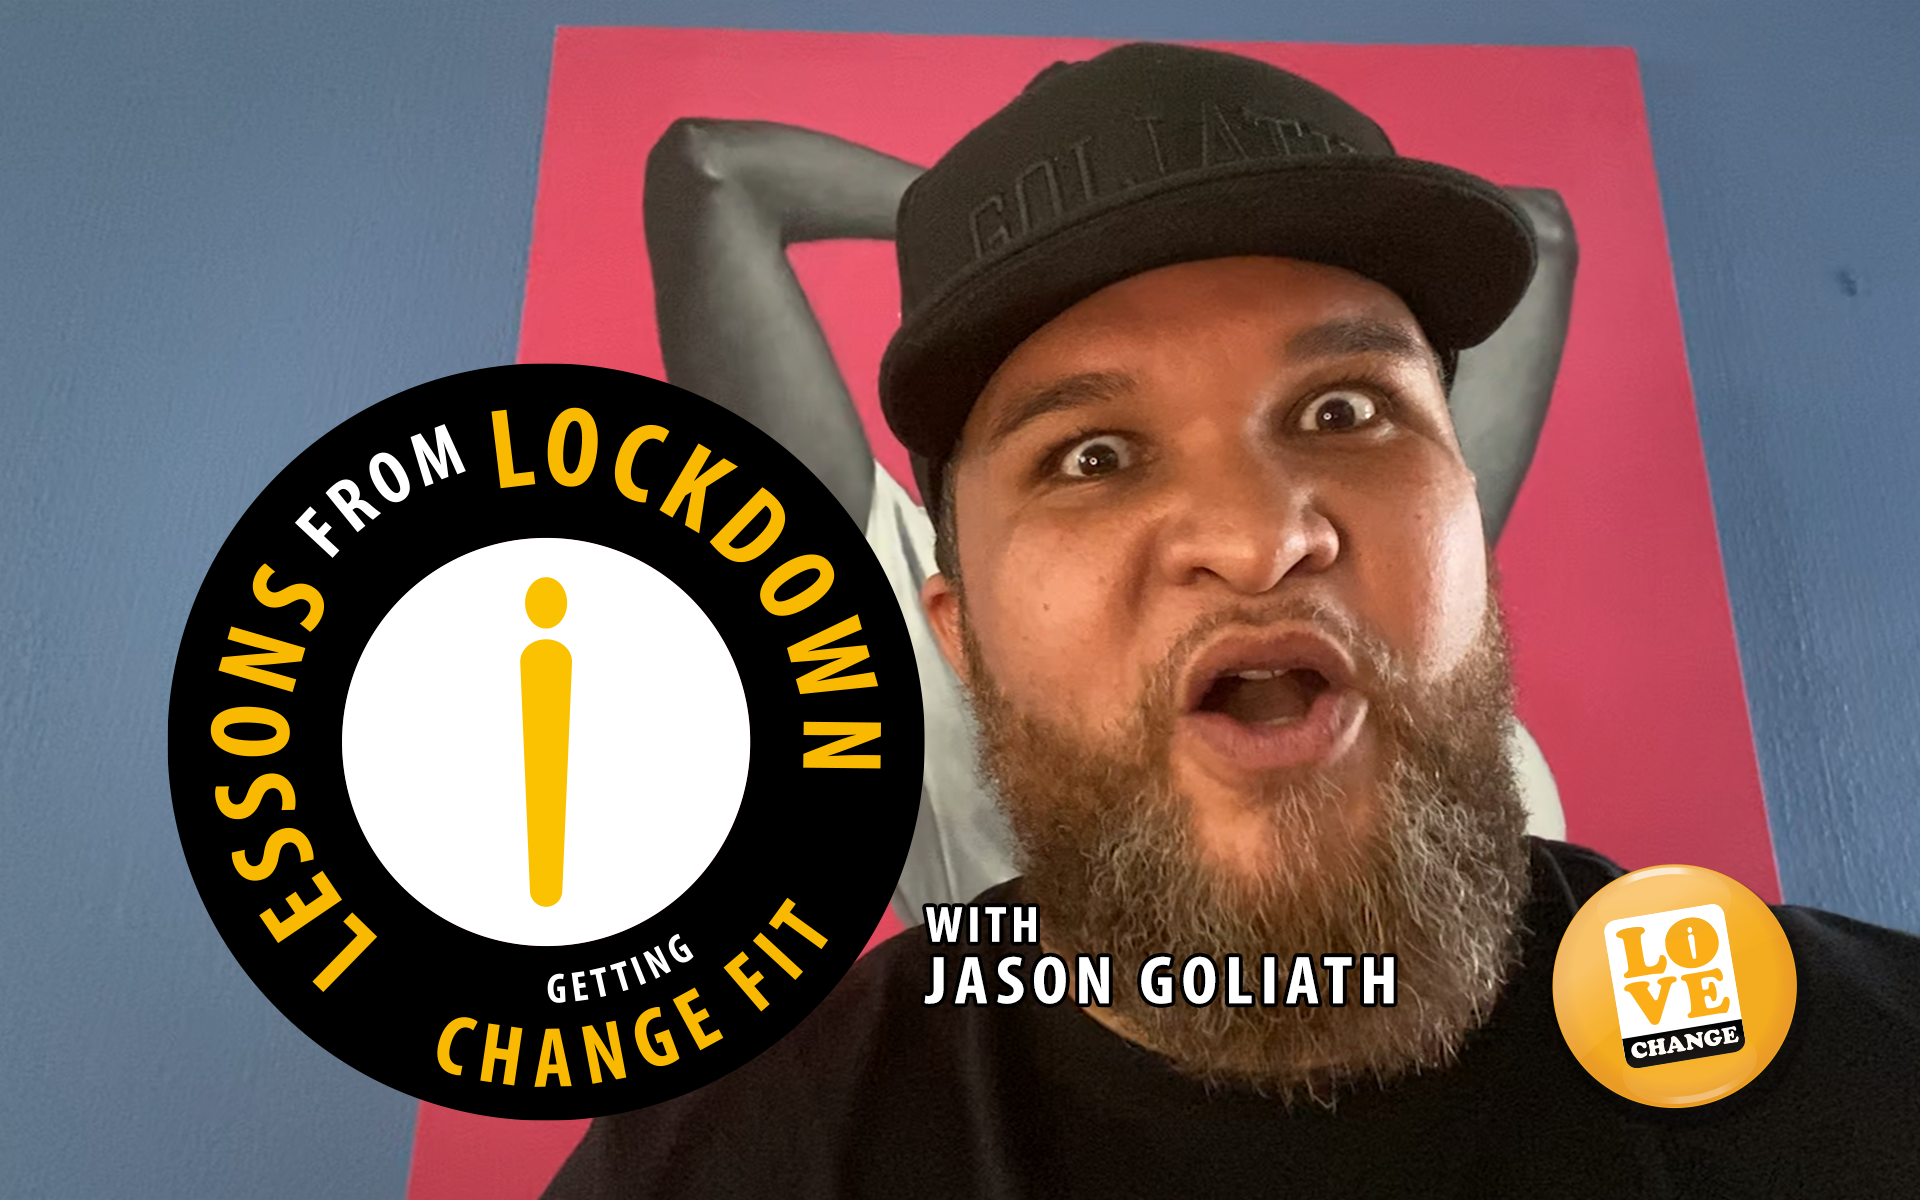 Lessons from lockdown with Jason Goliath